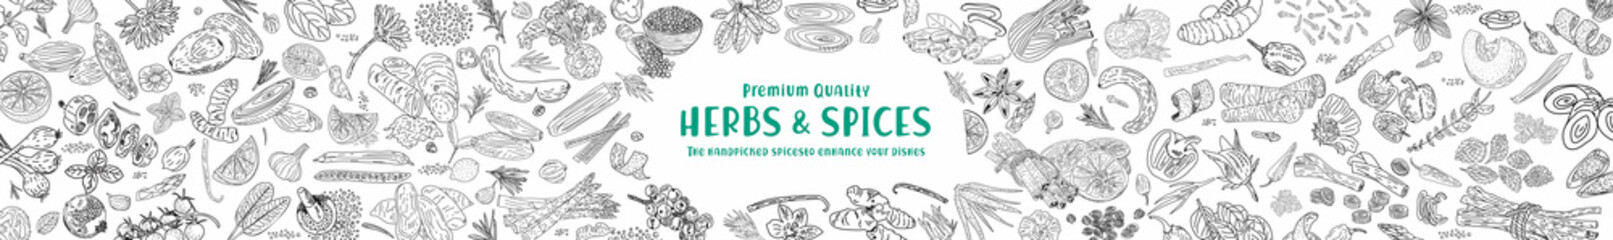 Herbs Spices vector hand drawn collection. Sketch kitchen herbs isolated.